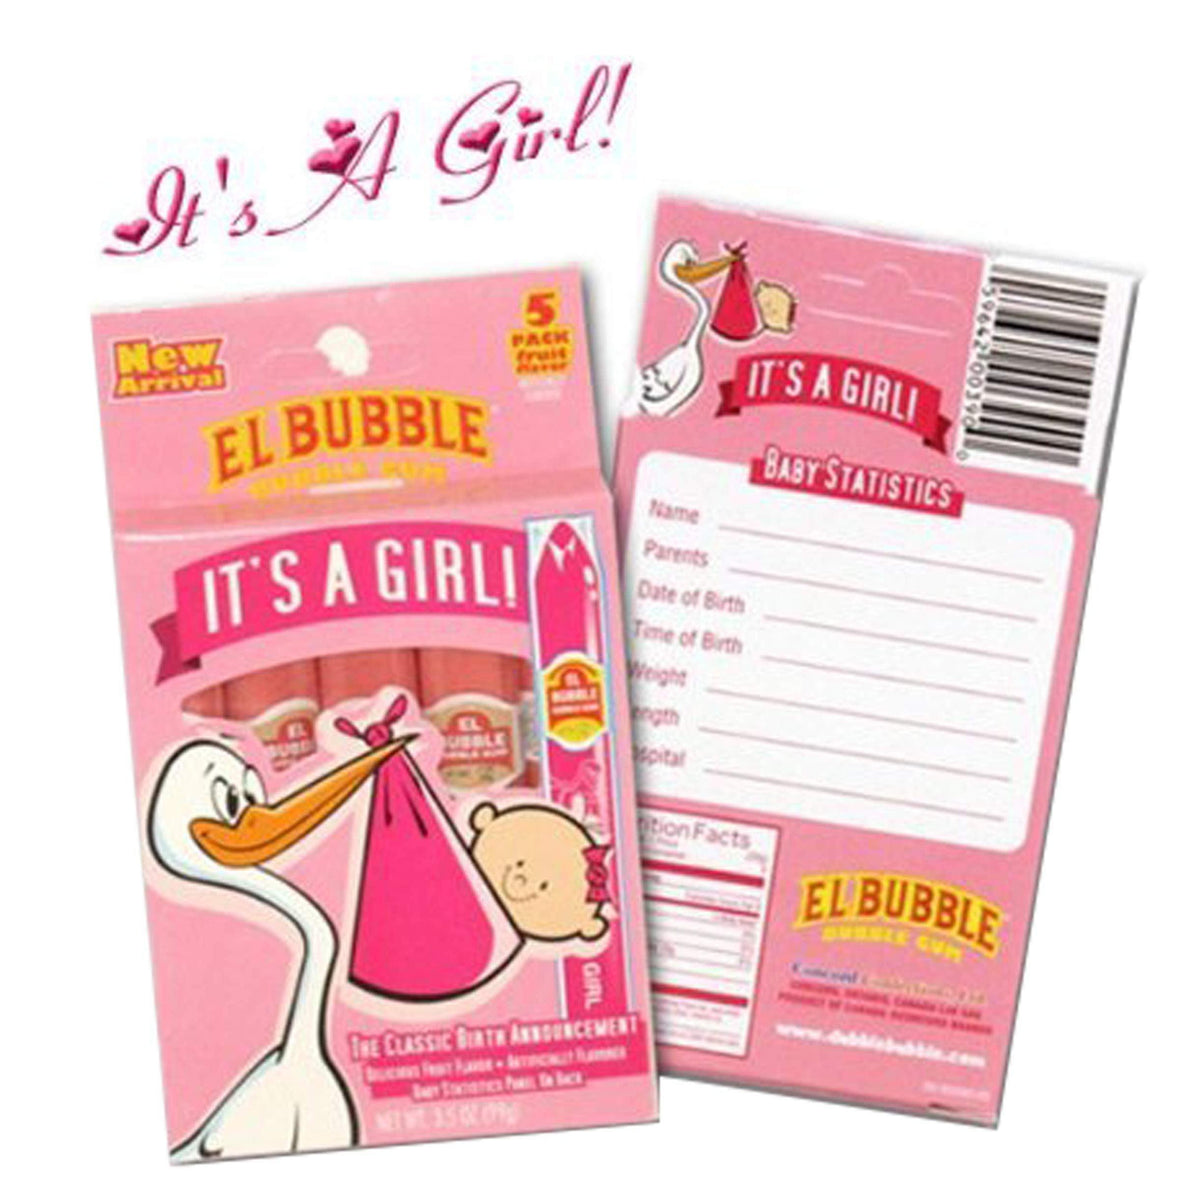 Front and rear view of the Bubble Gum Cigar-It&#39;s A Girl!-5 Pack showing panel for baby statistics.